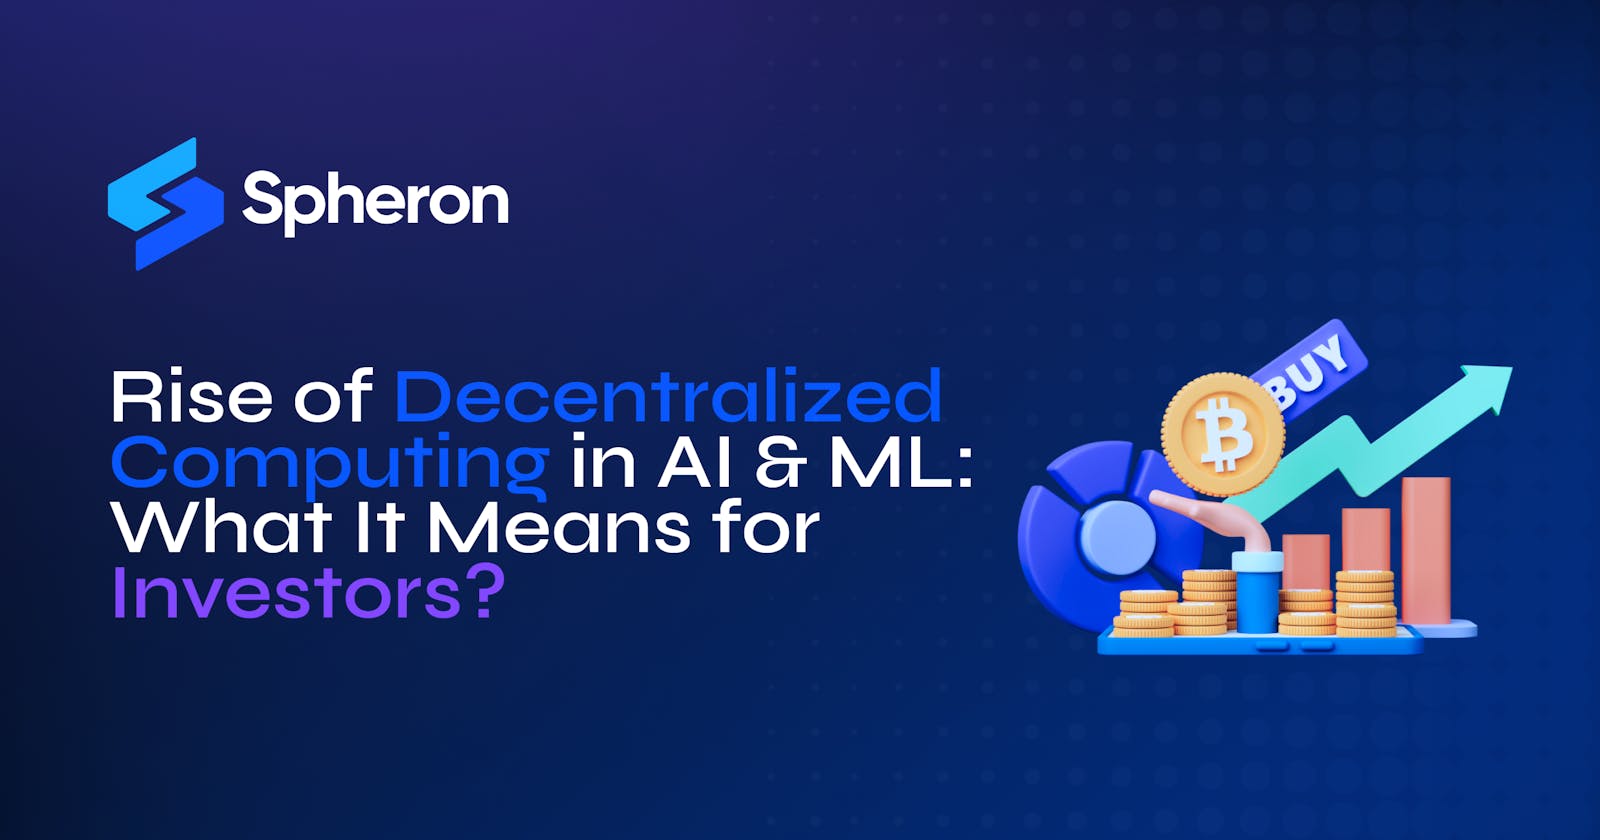 Rise of Decentralized Computing in AI and ML: What It Means for Investors